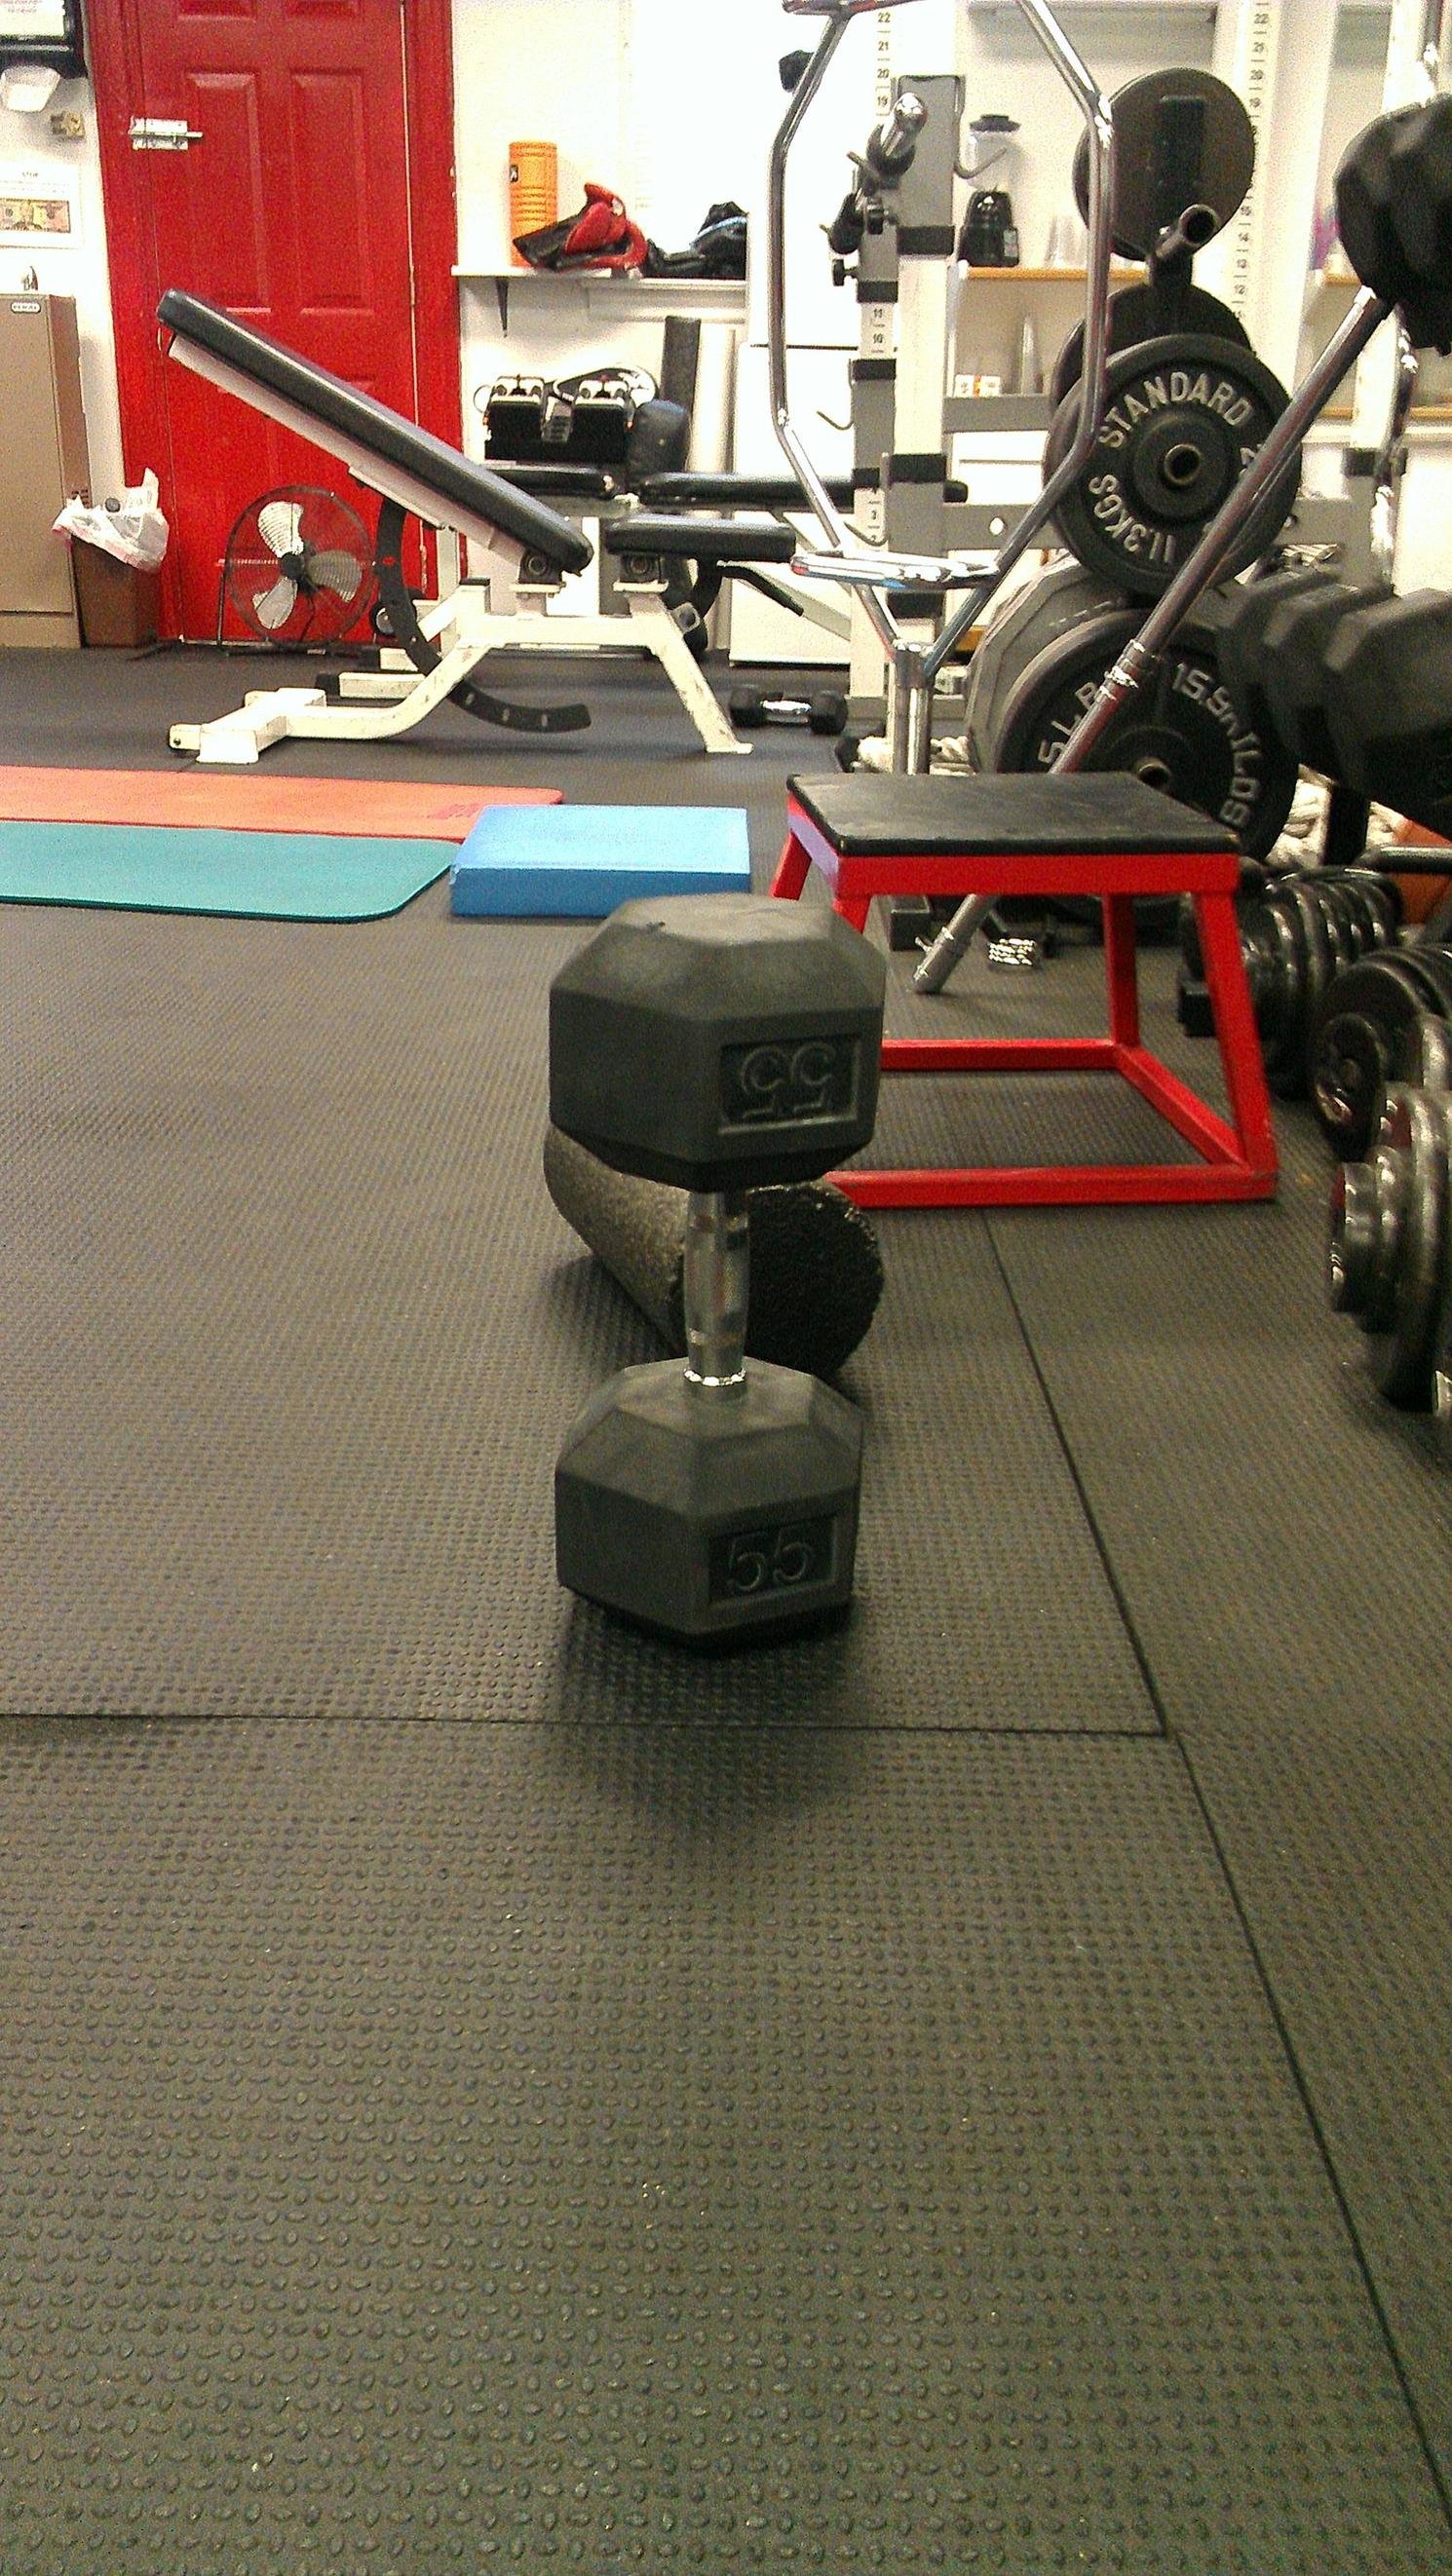 Dumbbell laying on its side.